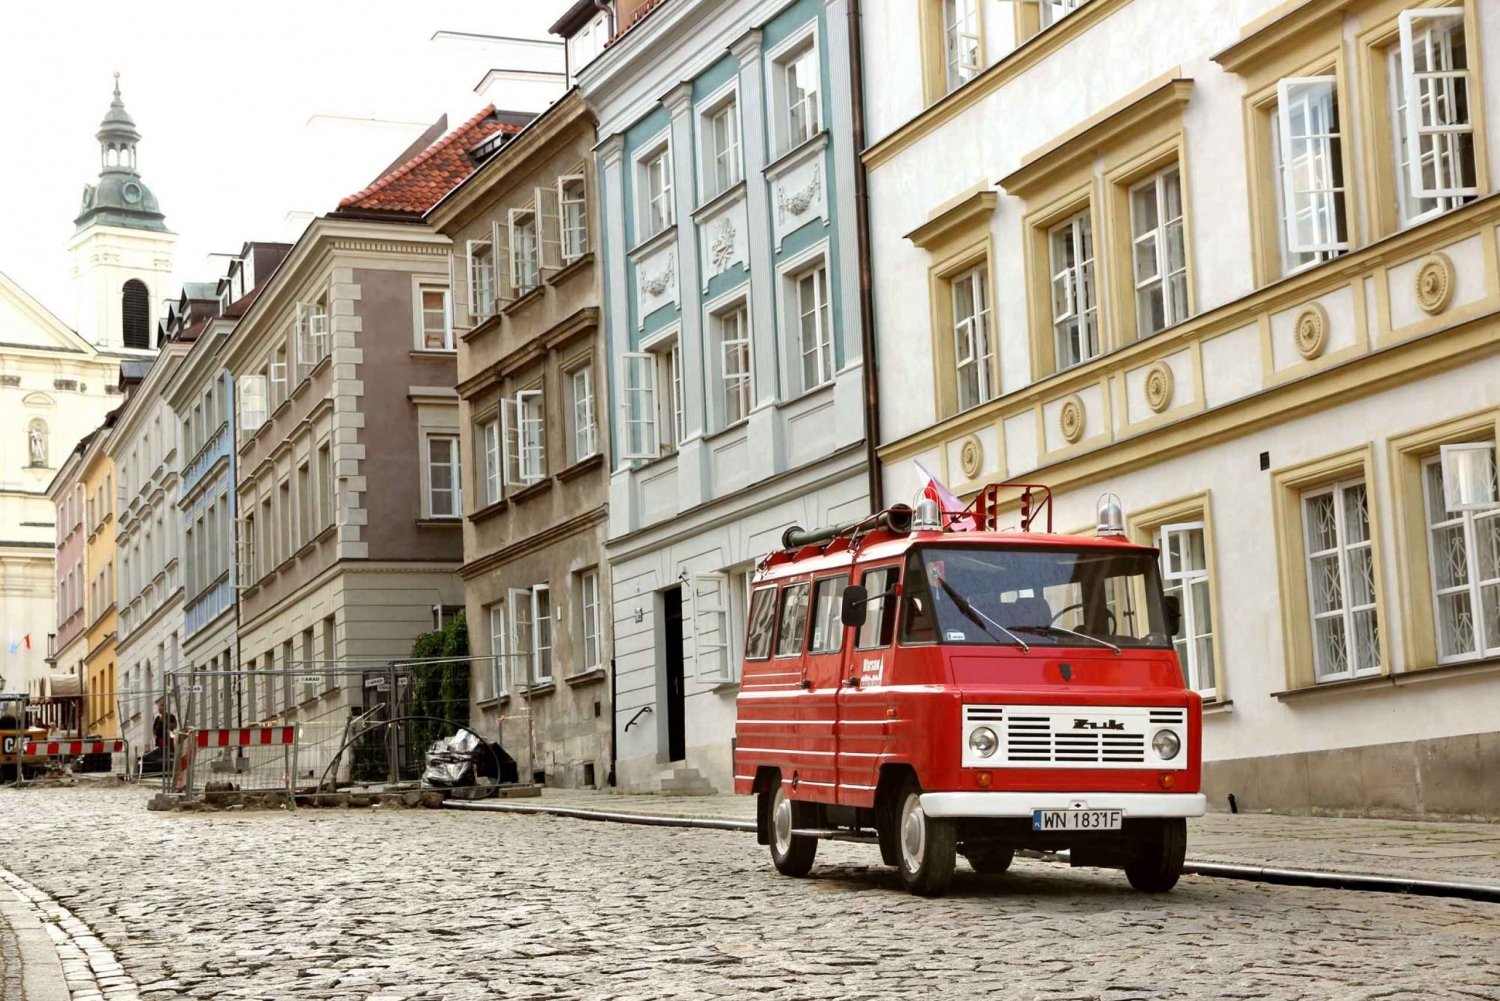 Warsaw: Classic Highlights Private Tour by Vintage Car